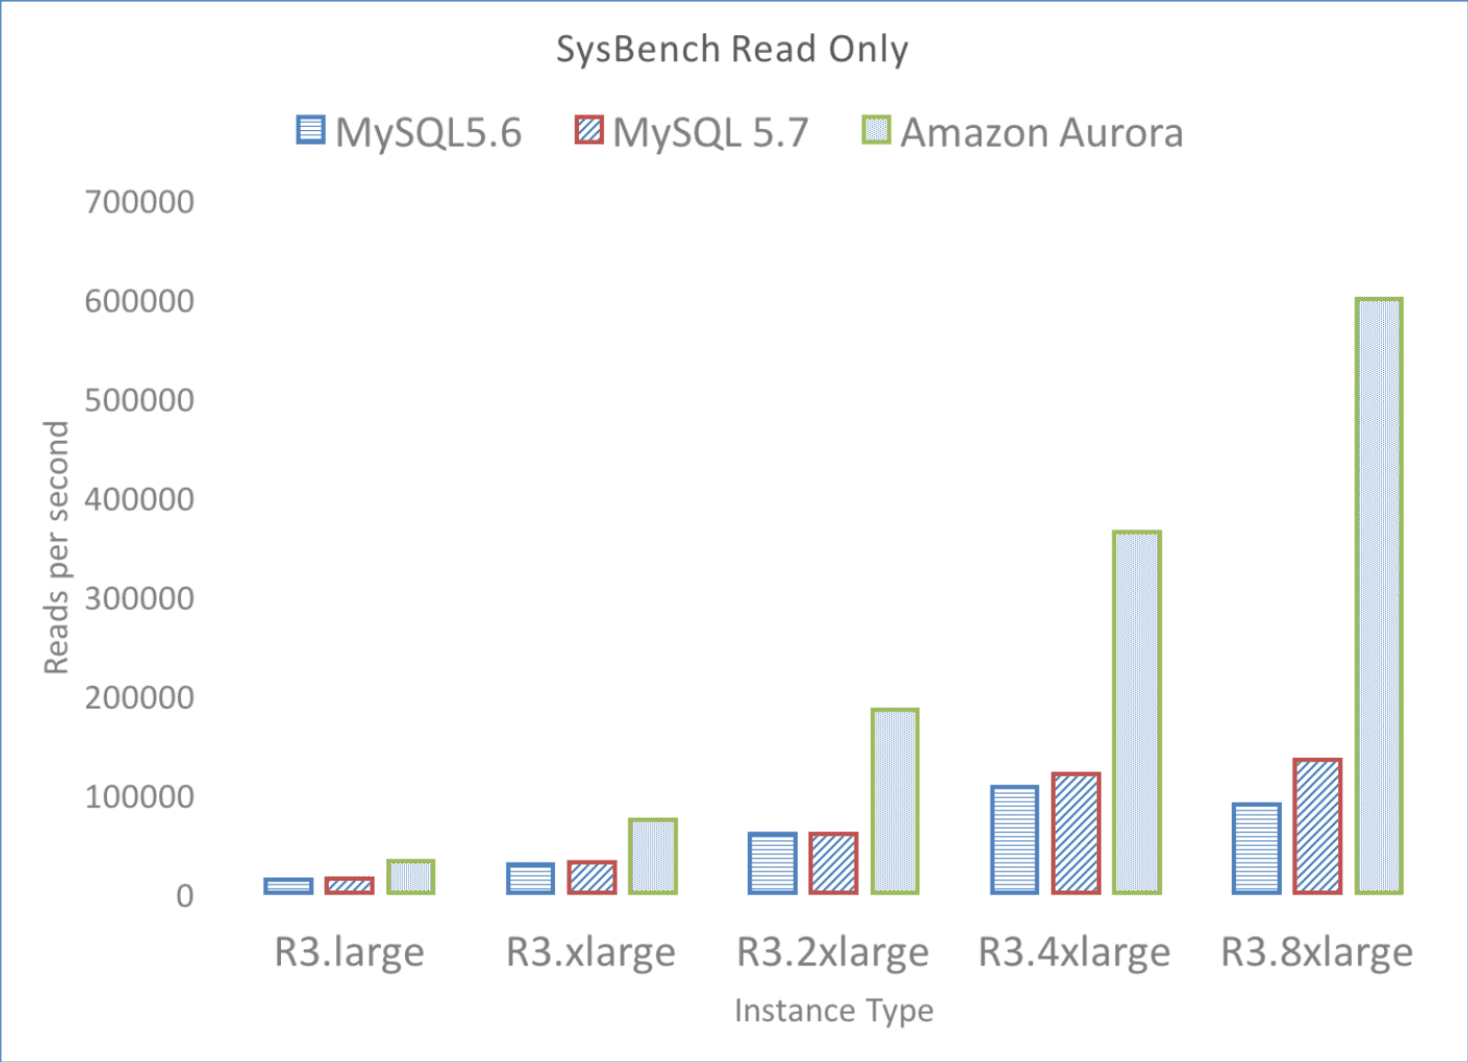 2008-sysbench-read-only.png